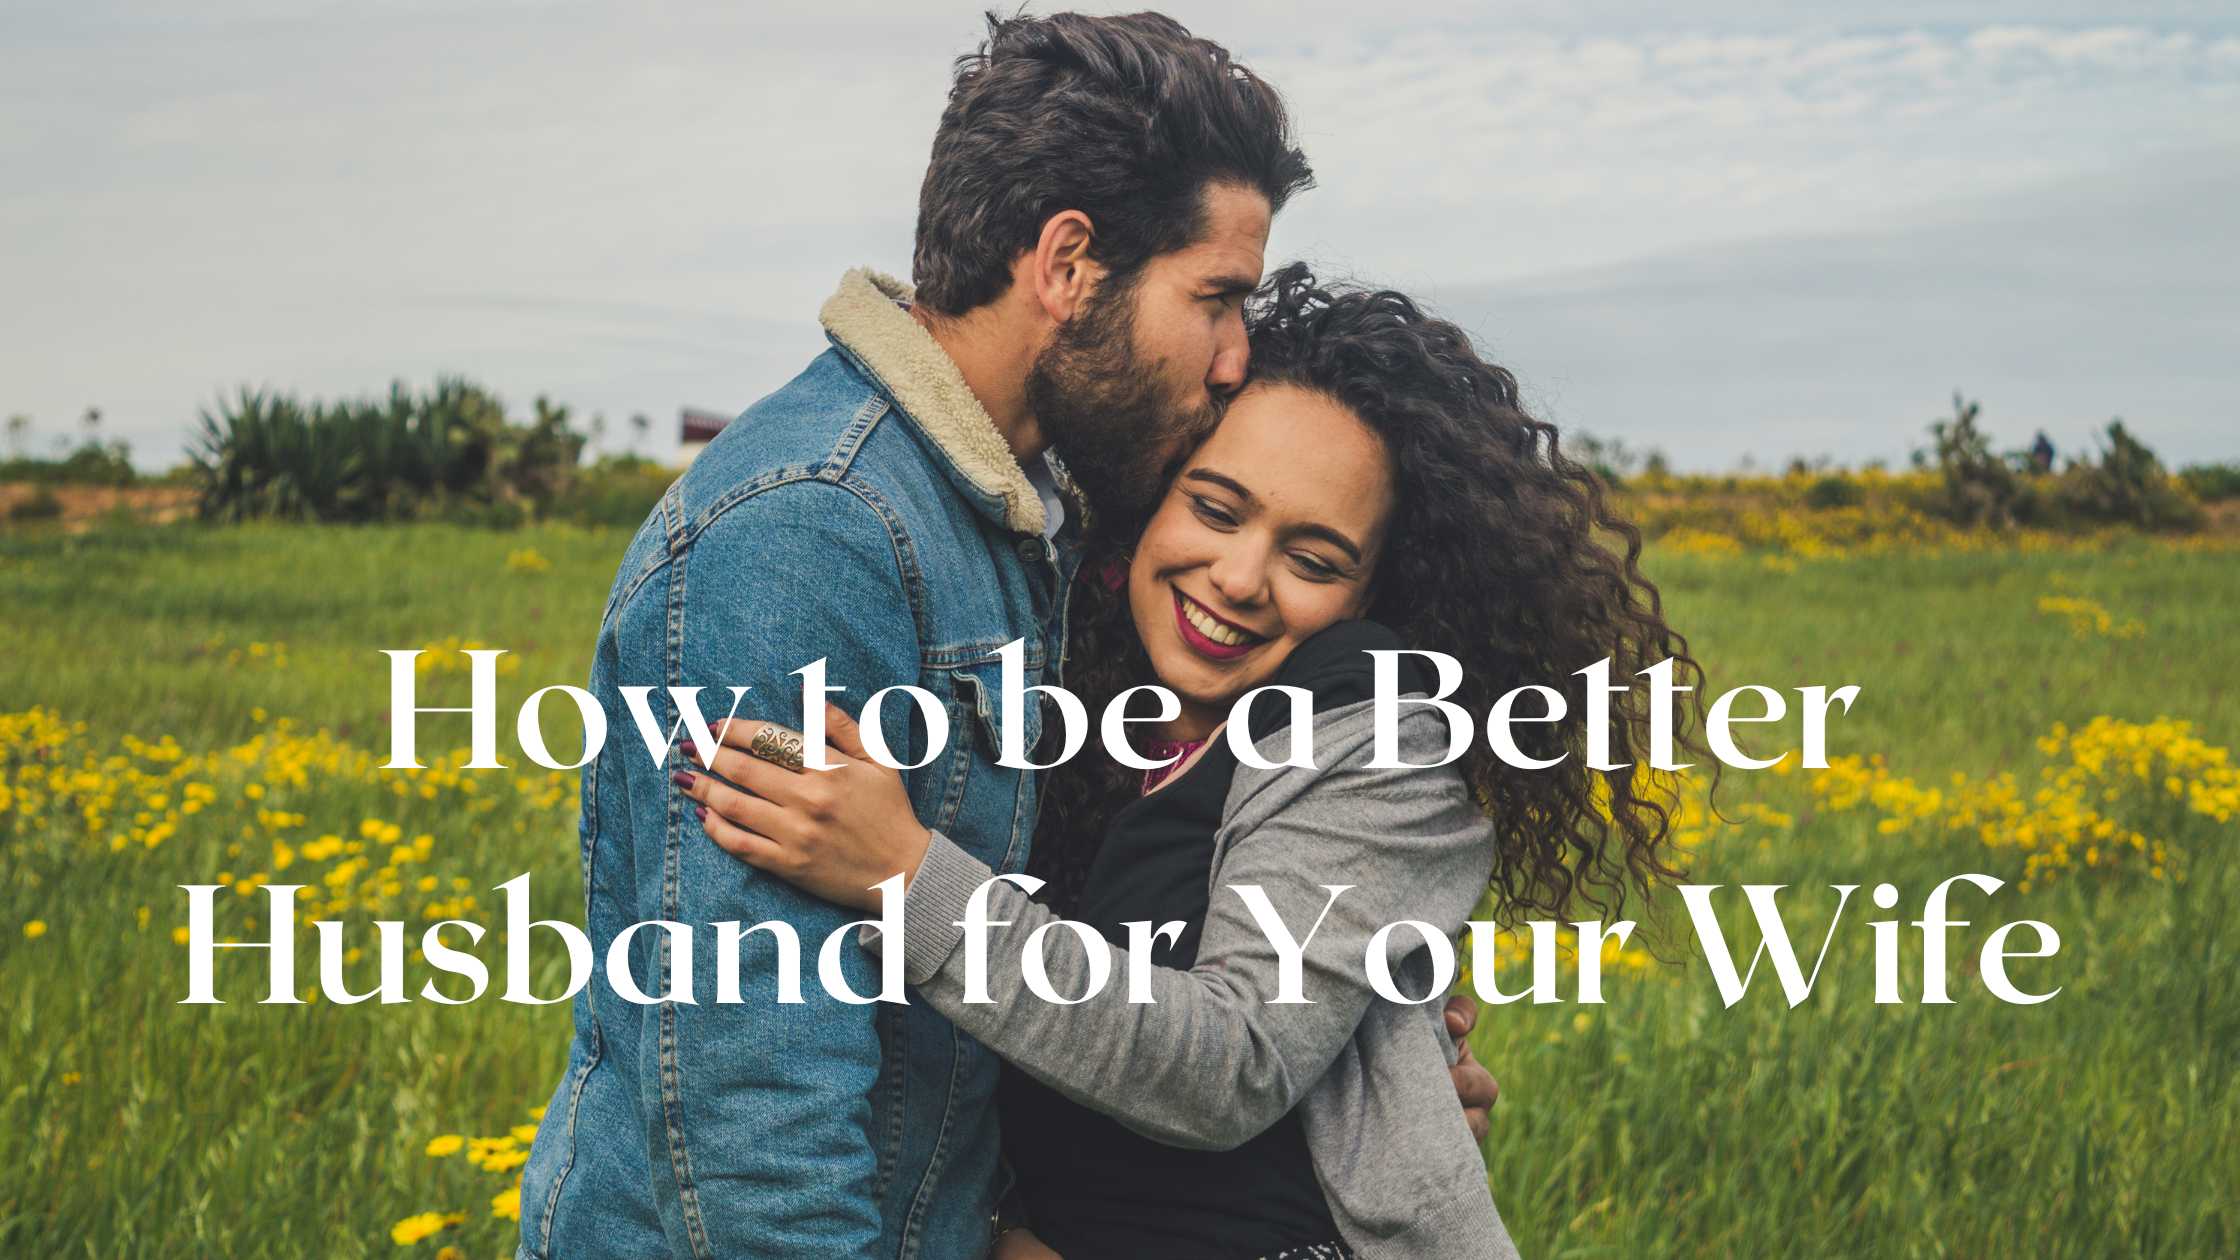 41 Ways to Be a Better Husband 59